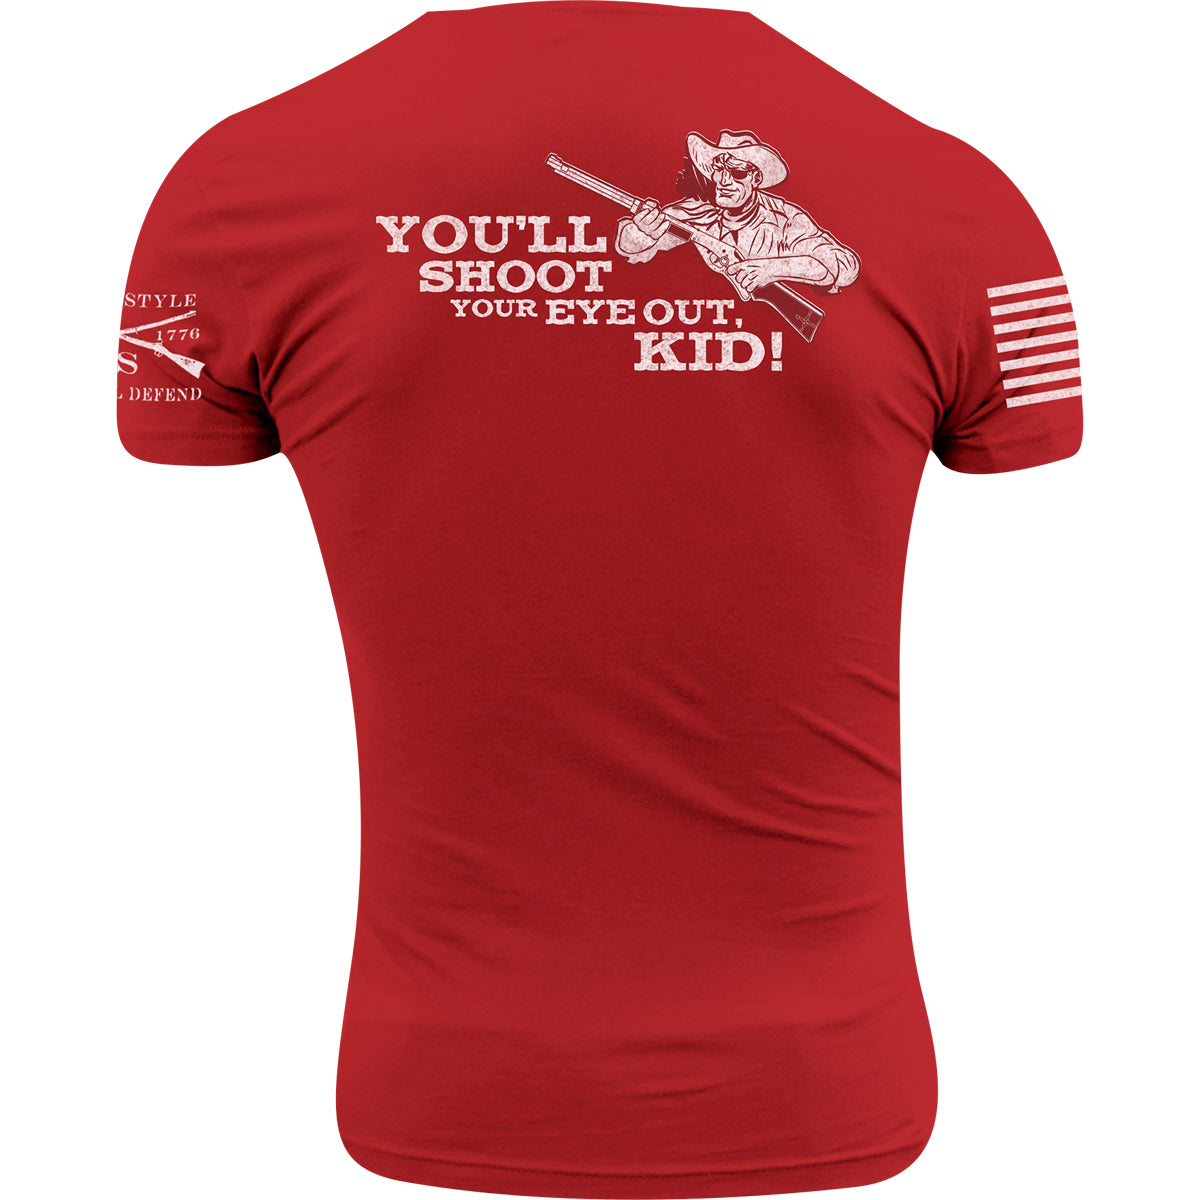 Grunt Style You'll Shoot Your Eye Out, Kid T-Shirt - Red Grunt Style